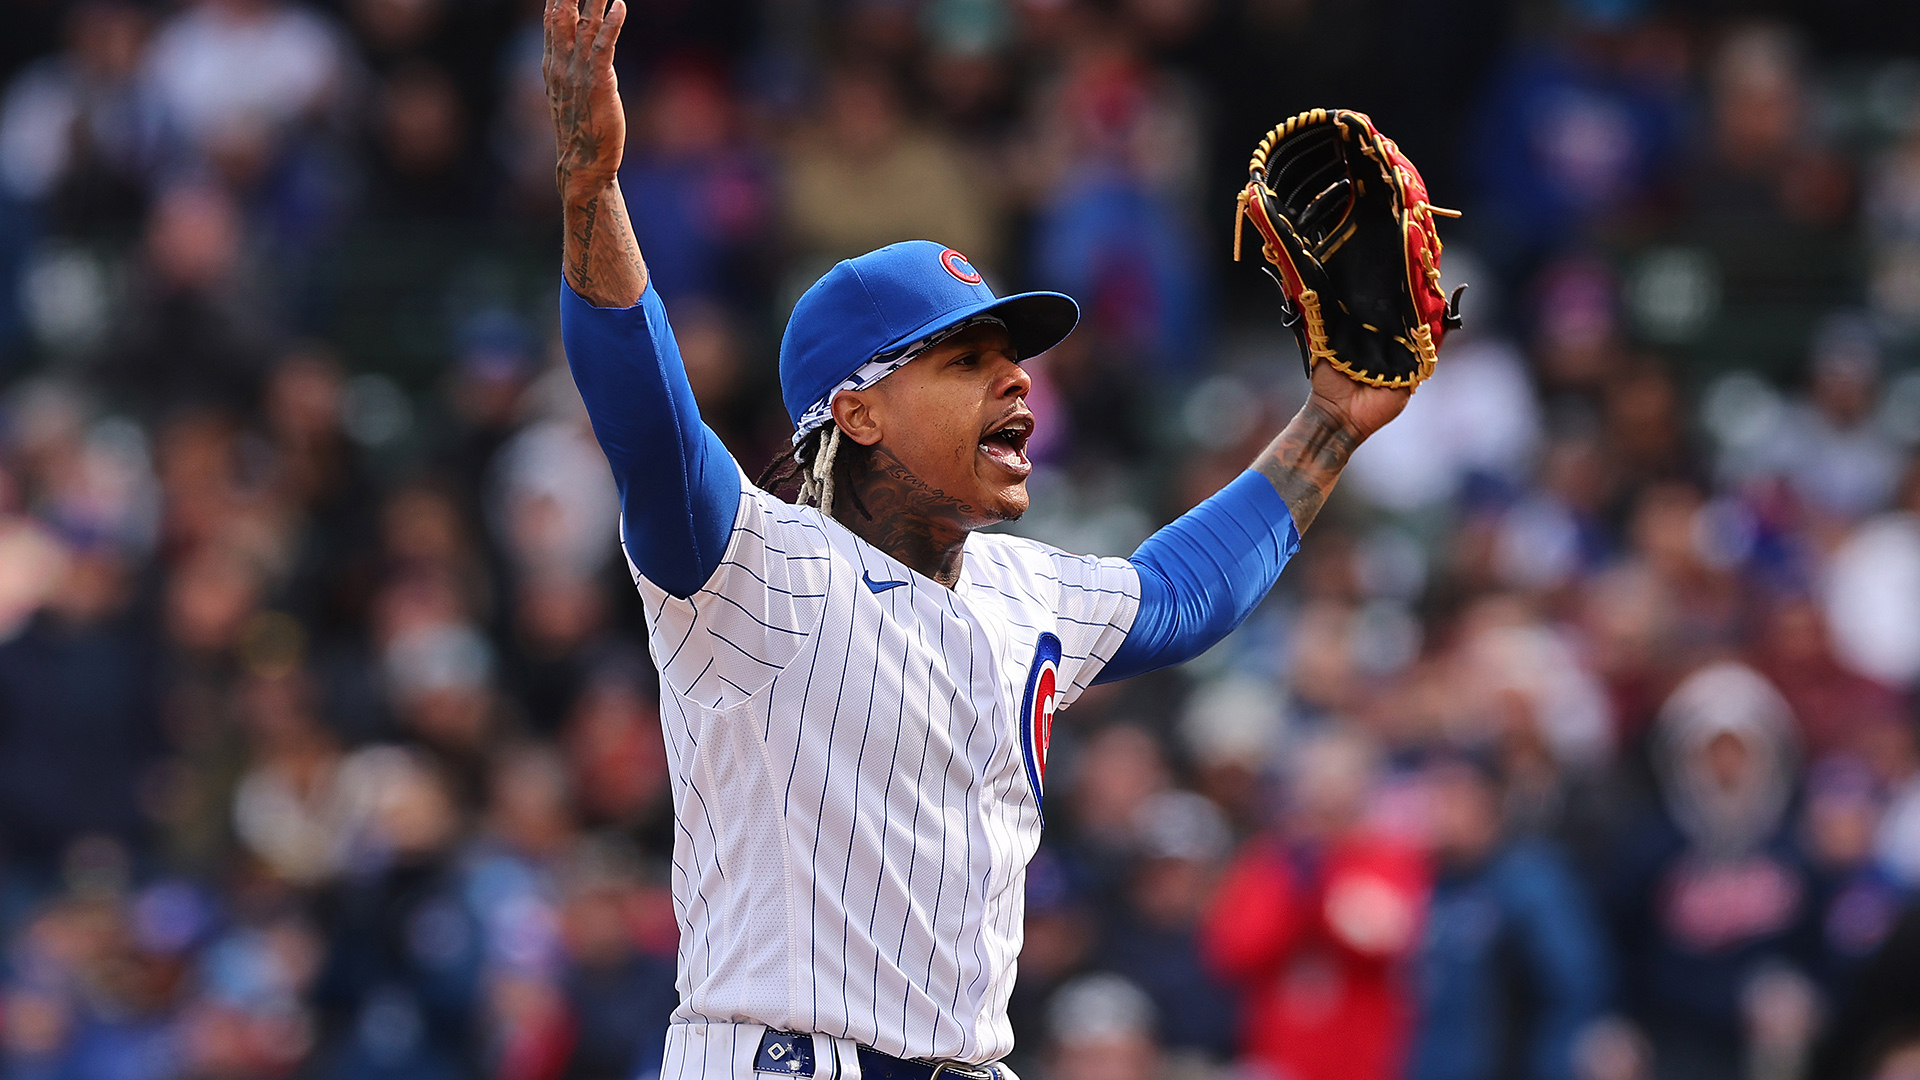 Cubs News: Marcus Stroman dominates his way to victory